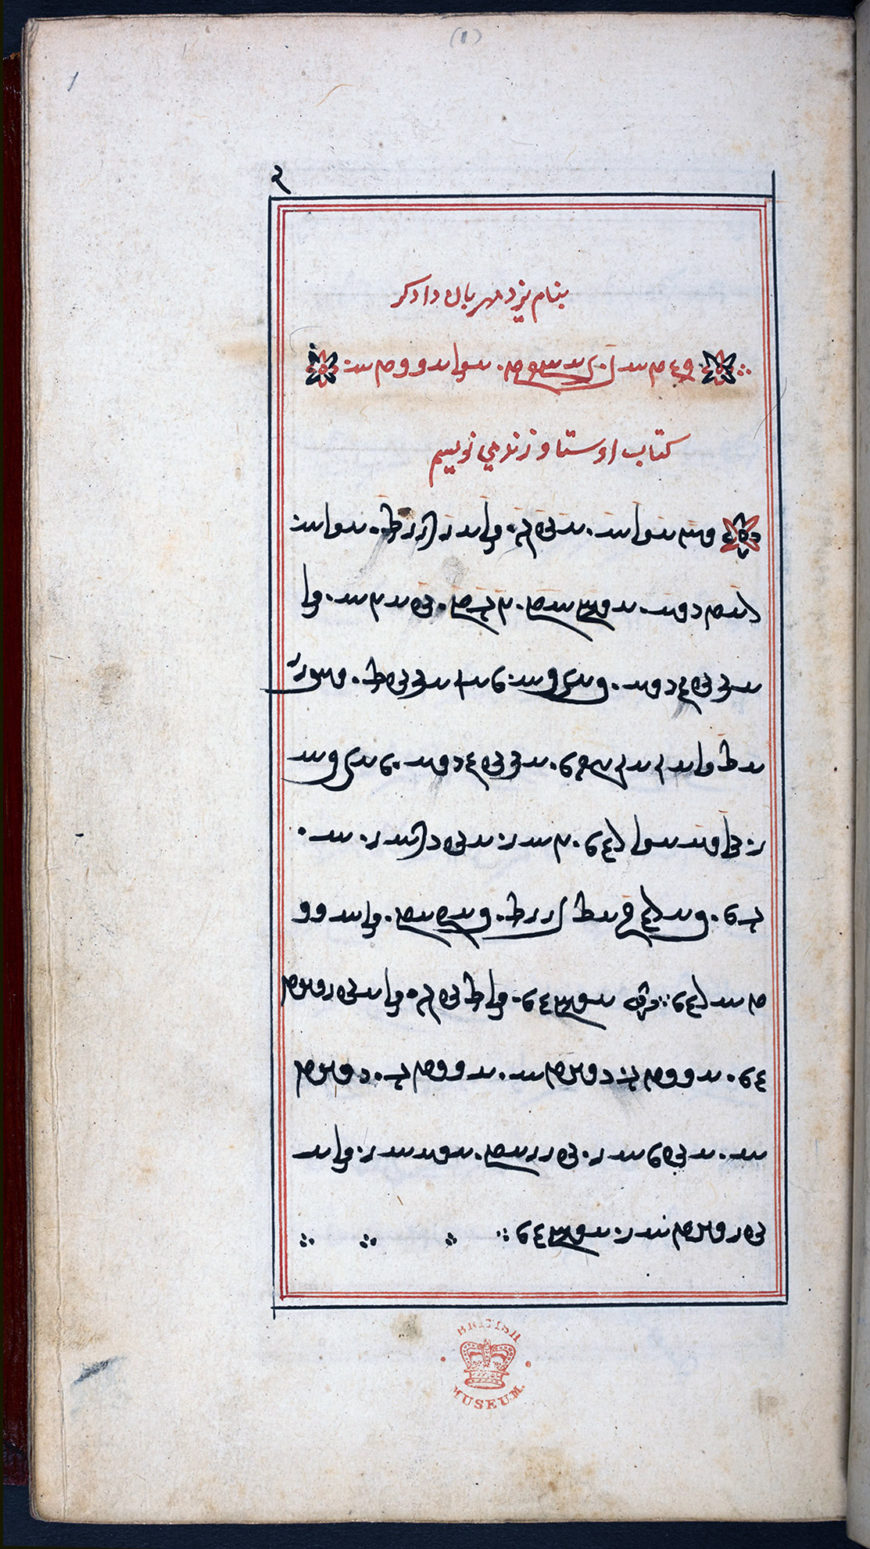 The Khordah Avesta (‘small Avesta’) contains prayers, hymns and invocations recited by priests and lay people in daily worship. This image shows the first page of a manuscript which begins with the Yatha ahu vairyo (‘Just as he is to be chosen by life’) and the Ashem vohū (‘Good order’), two of the holiest Zoroastrian prayers. 1673 (Royal MS 16 B VI, British Library)